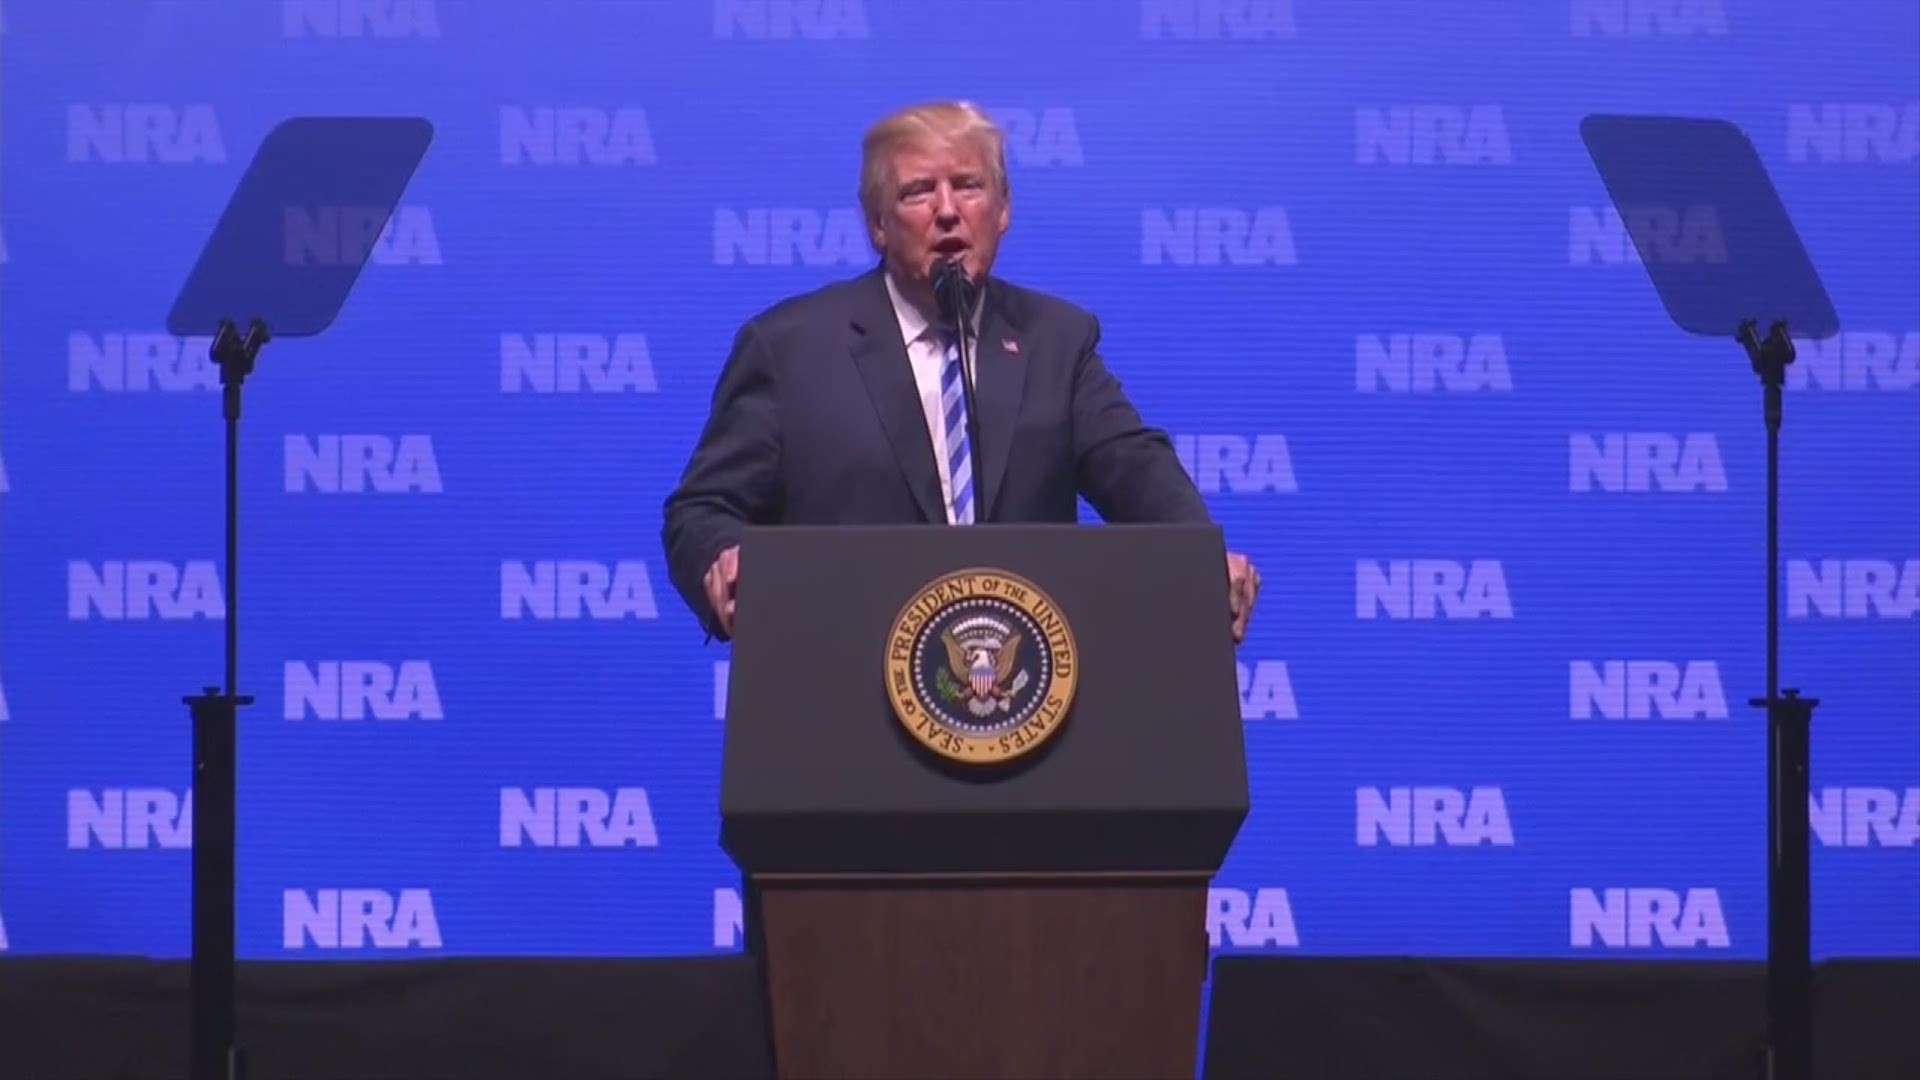 President Trump paid tribute to the Dallas Police Department and fallen officer Rogelio Santander in his speech at the NRA Convention Friday.